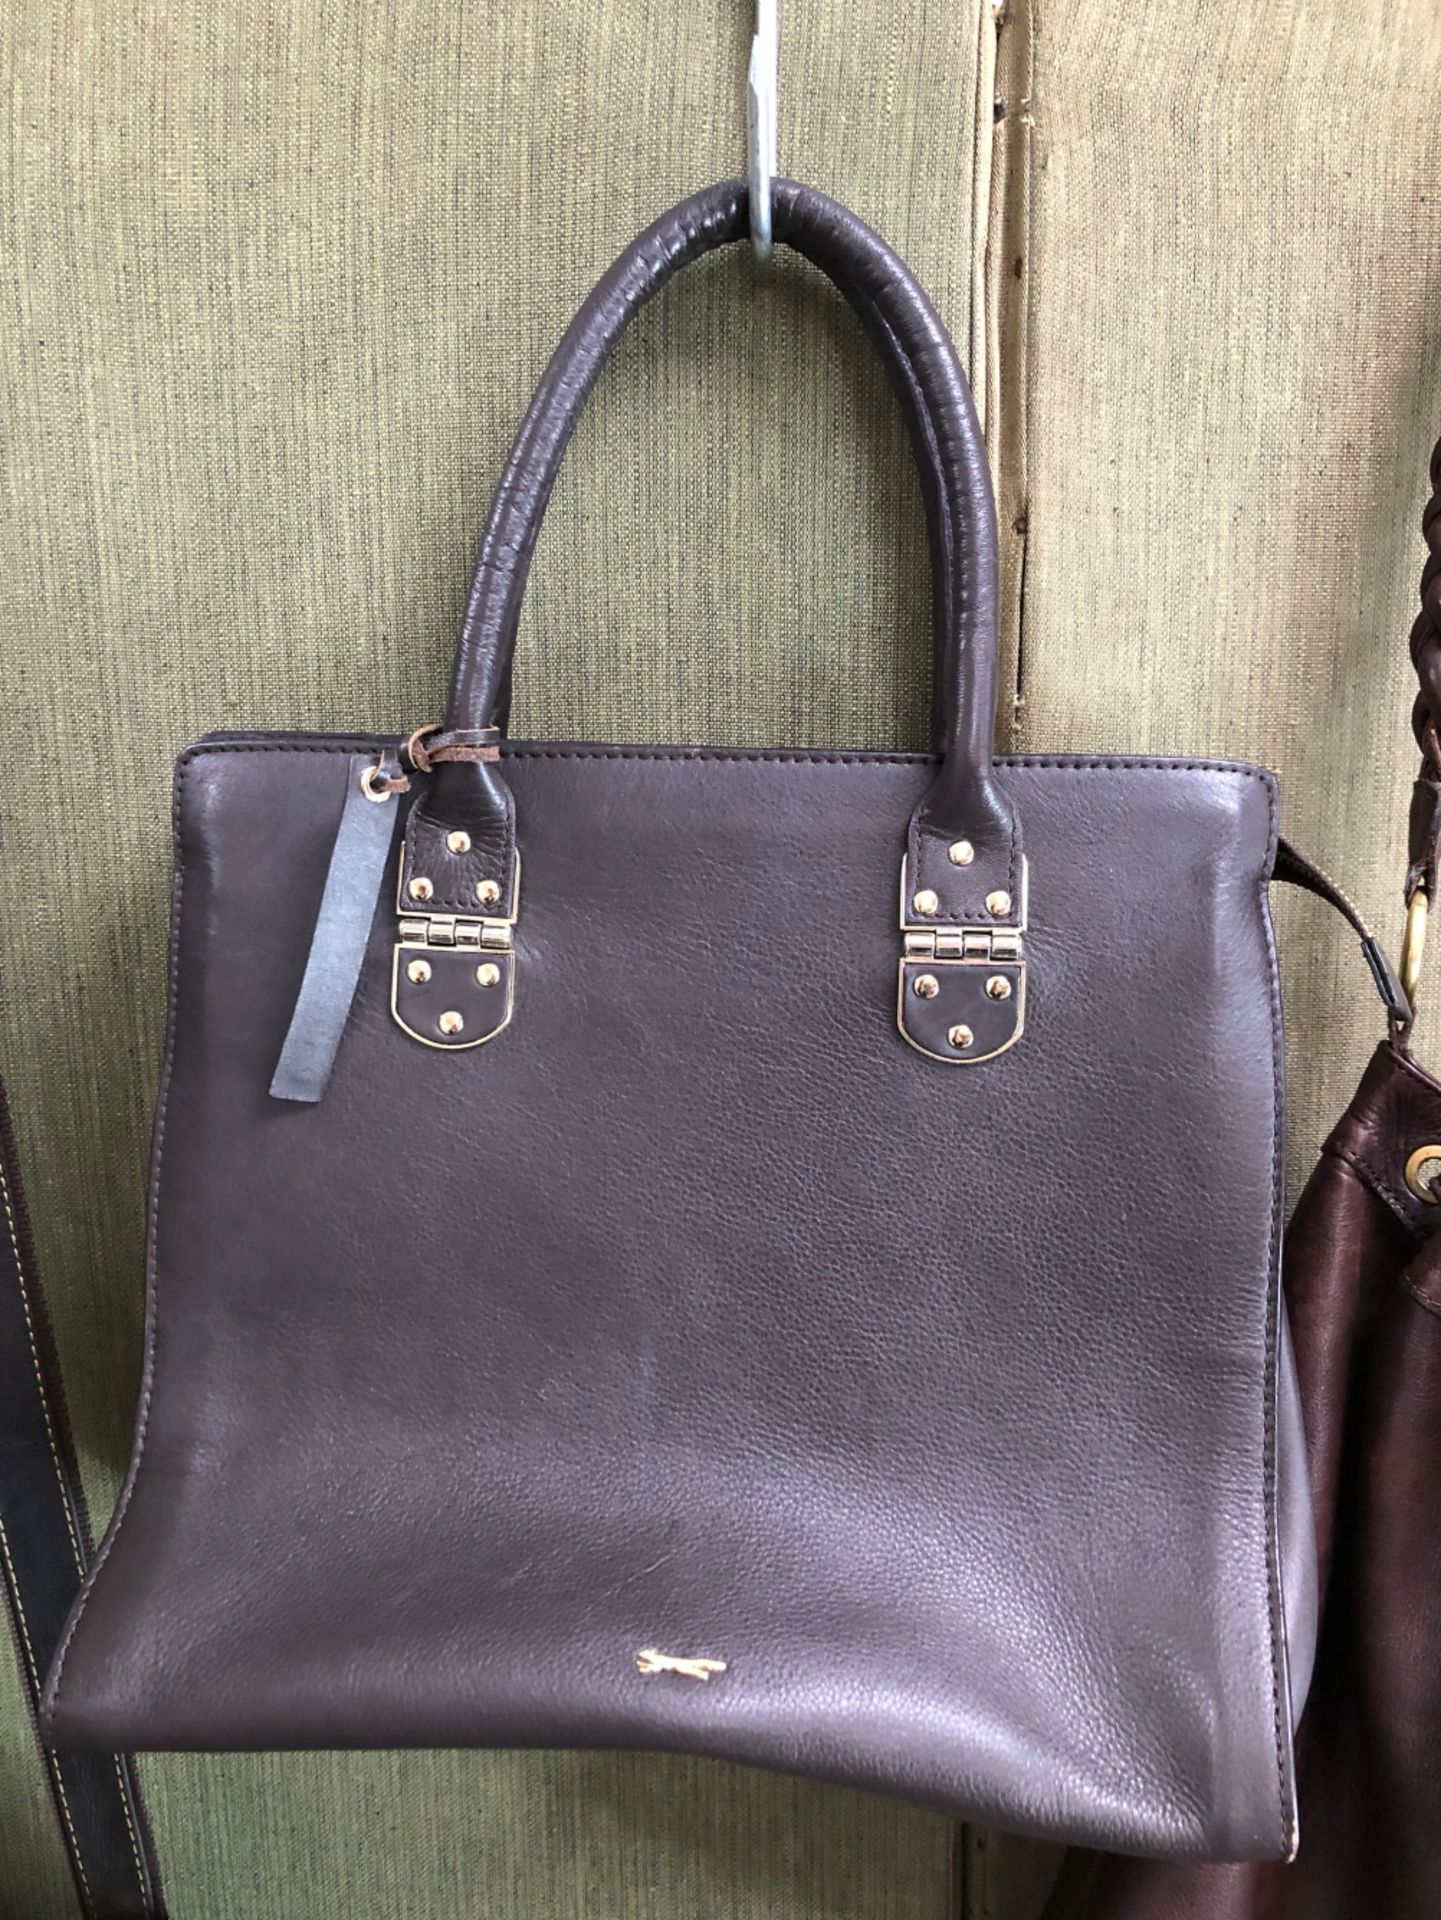 A ZARA WOMAN LARGE BROWN HANDBAG W 45cm, TOGETHER WITH A DARK BROWN LEATHER PAUL COSTELLOE BAG, A - Image 2 of 11